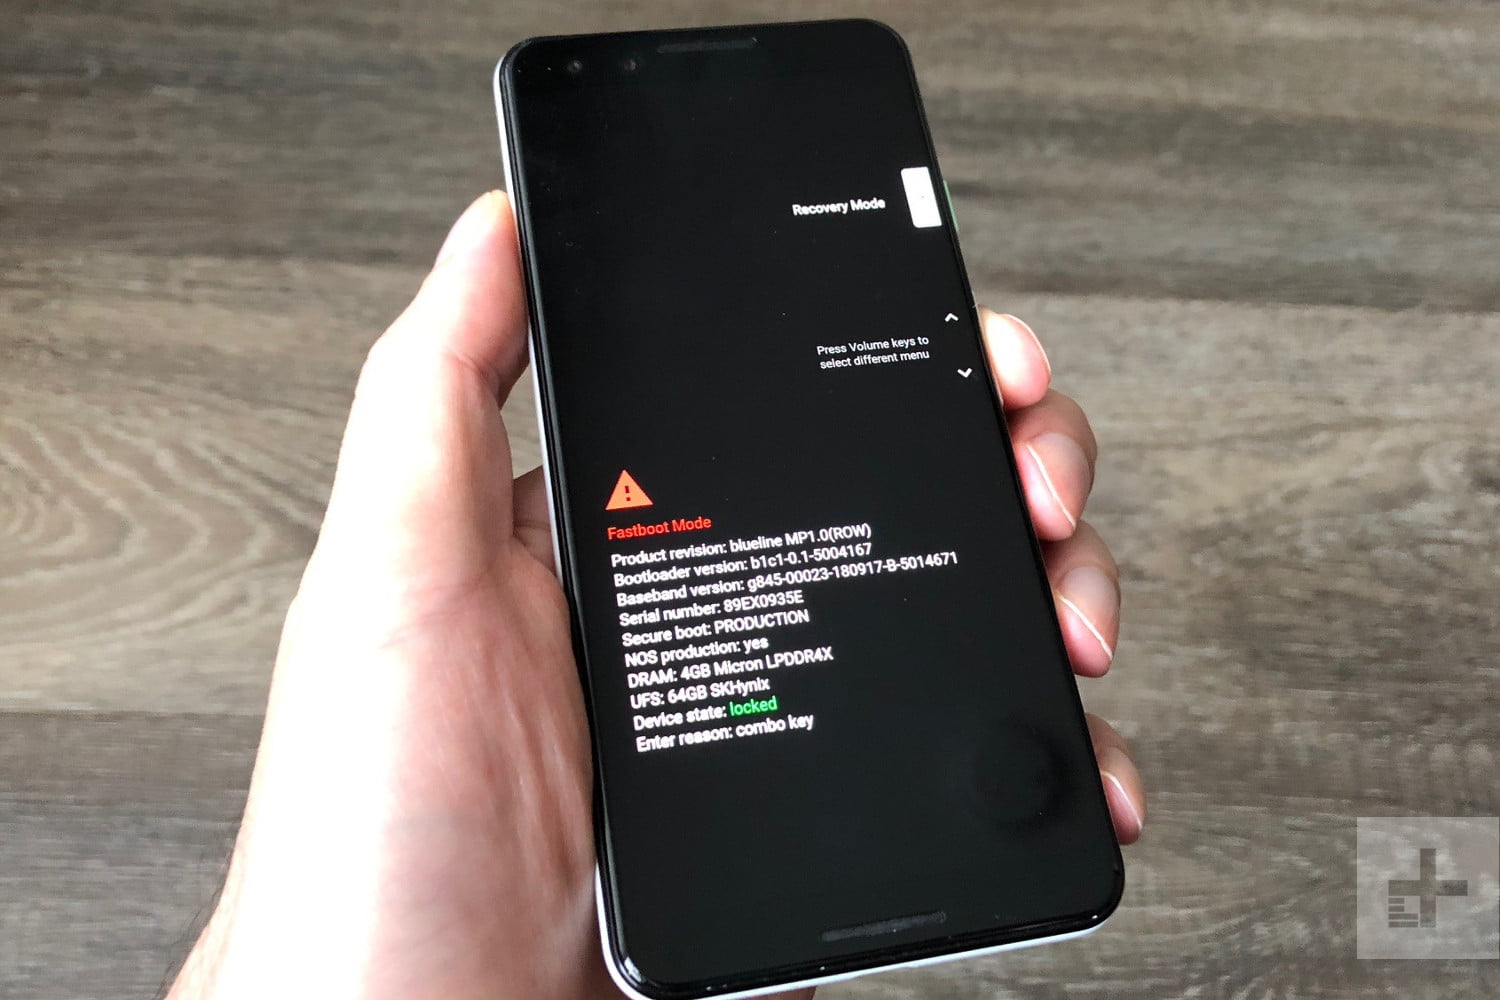 Android mode recovery screen